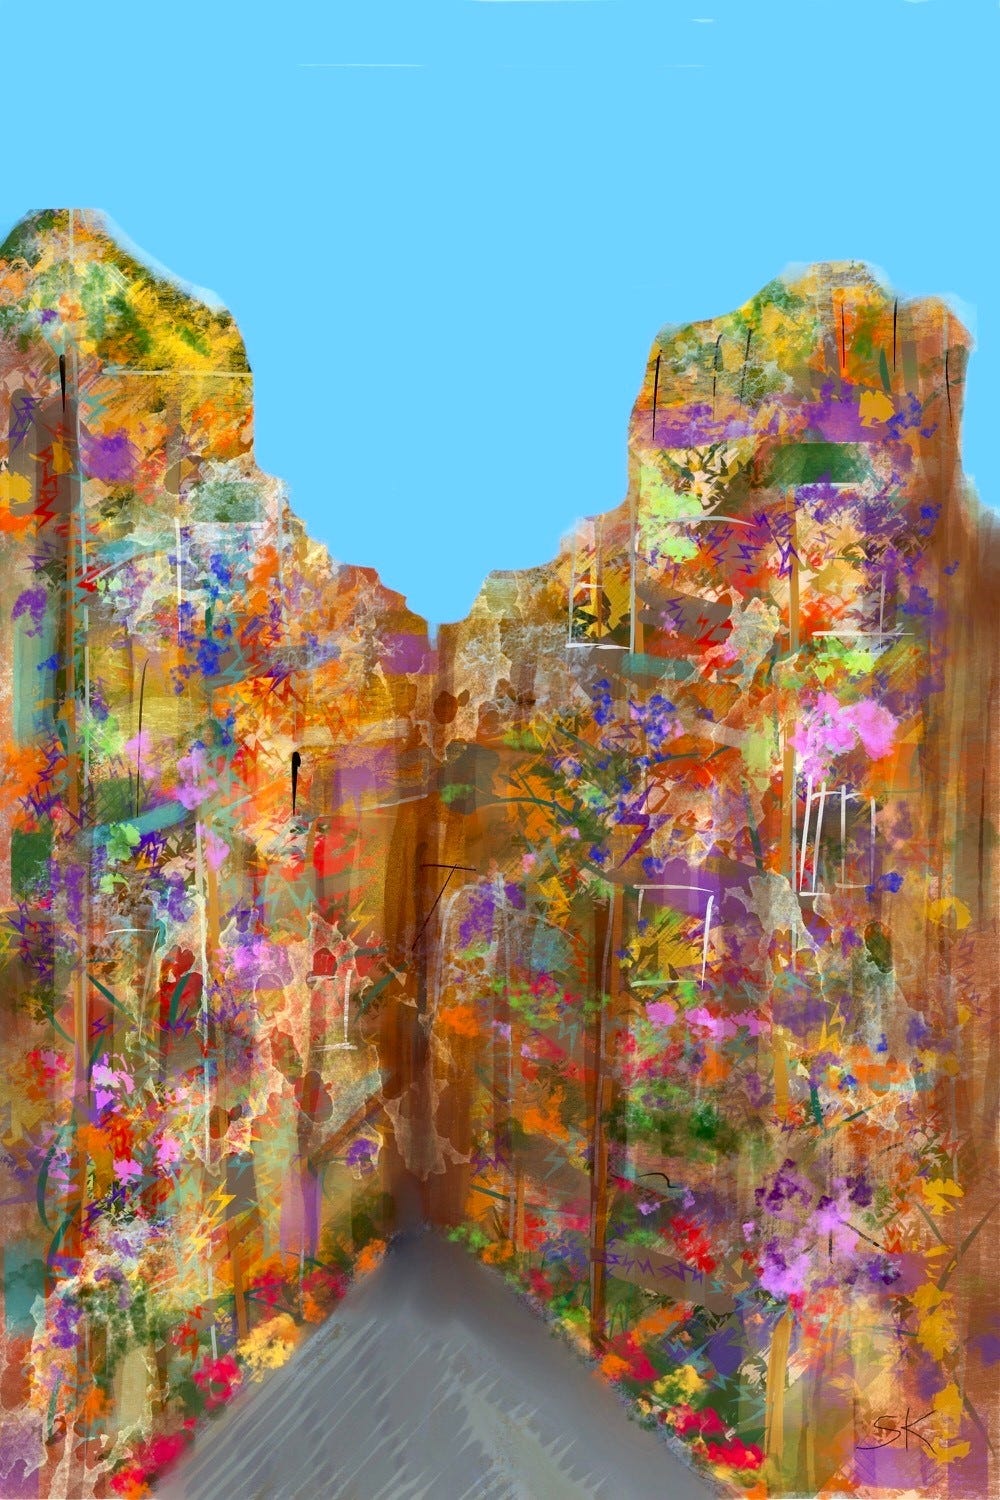 Abstract painting by Sherry Killam Arts of colorful vertical garden on tall buildings against a blue sky.